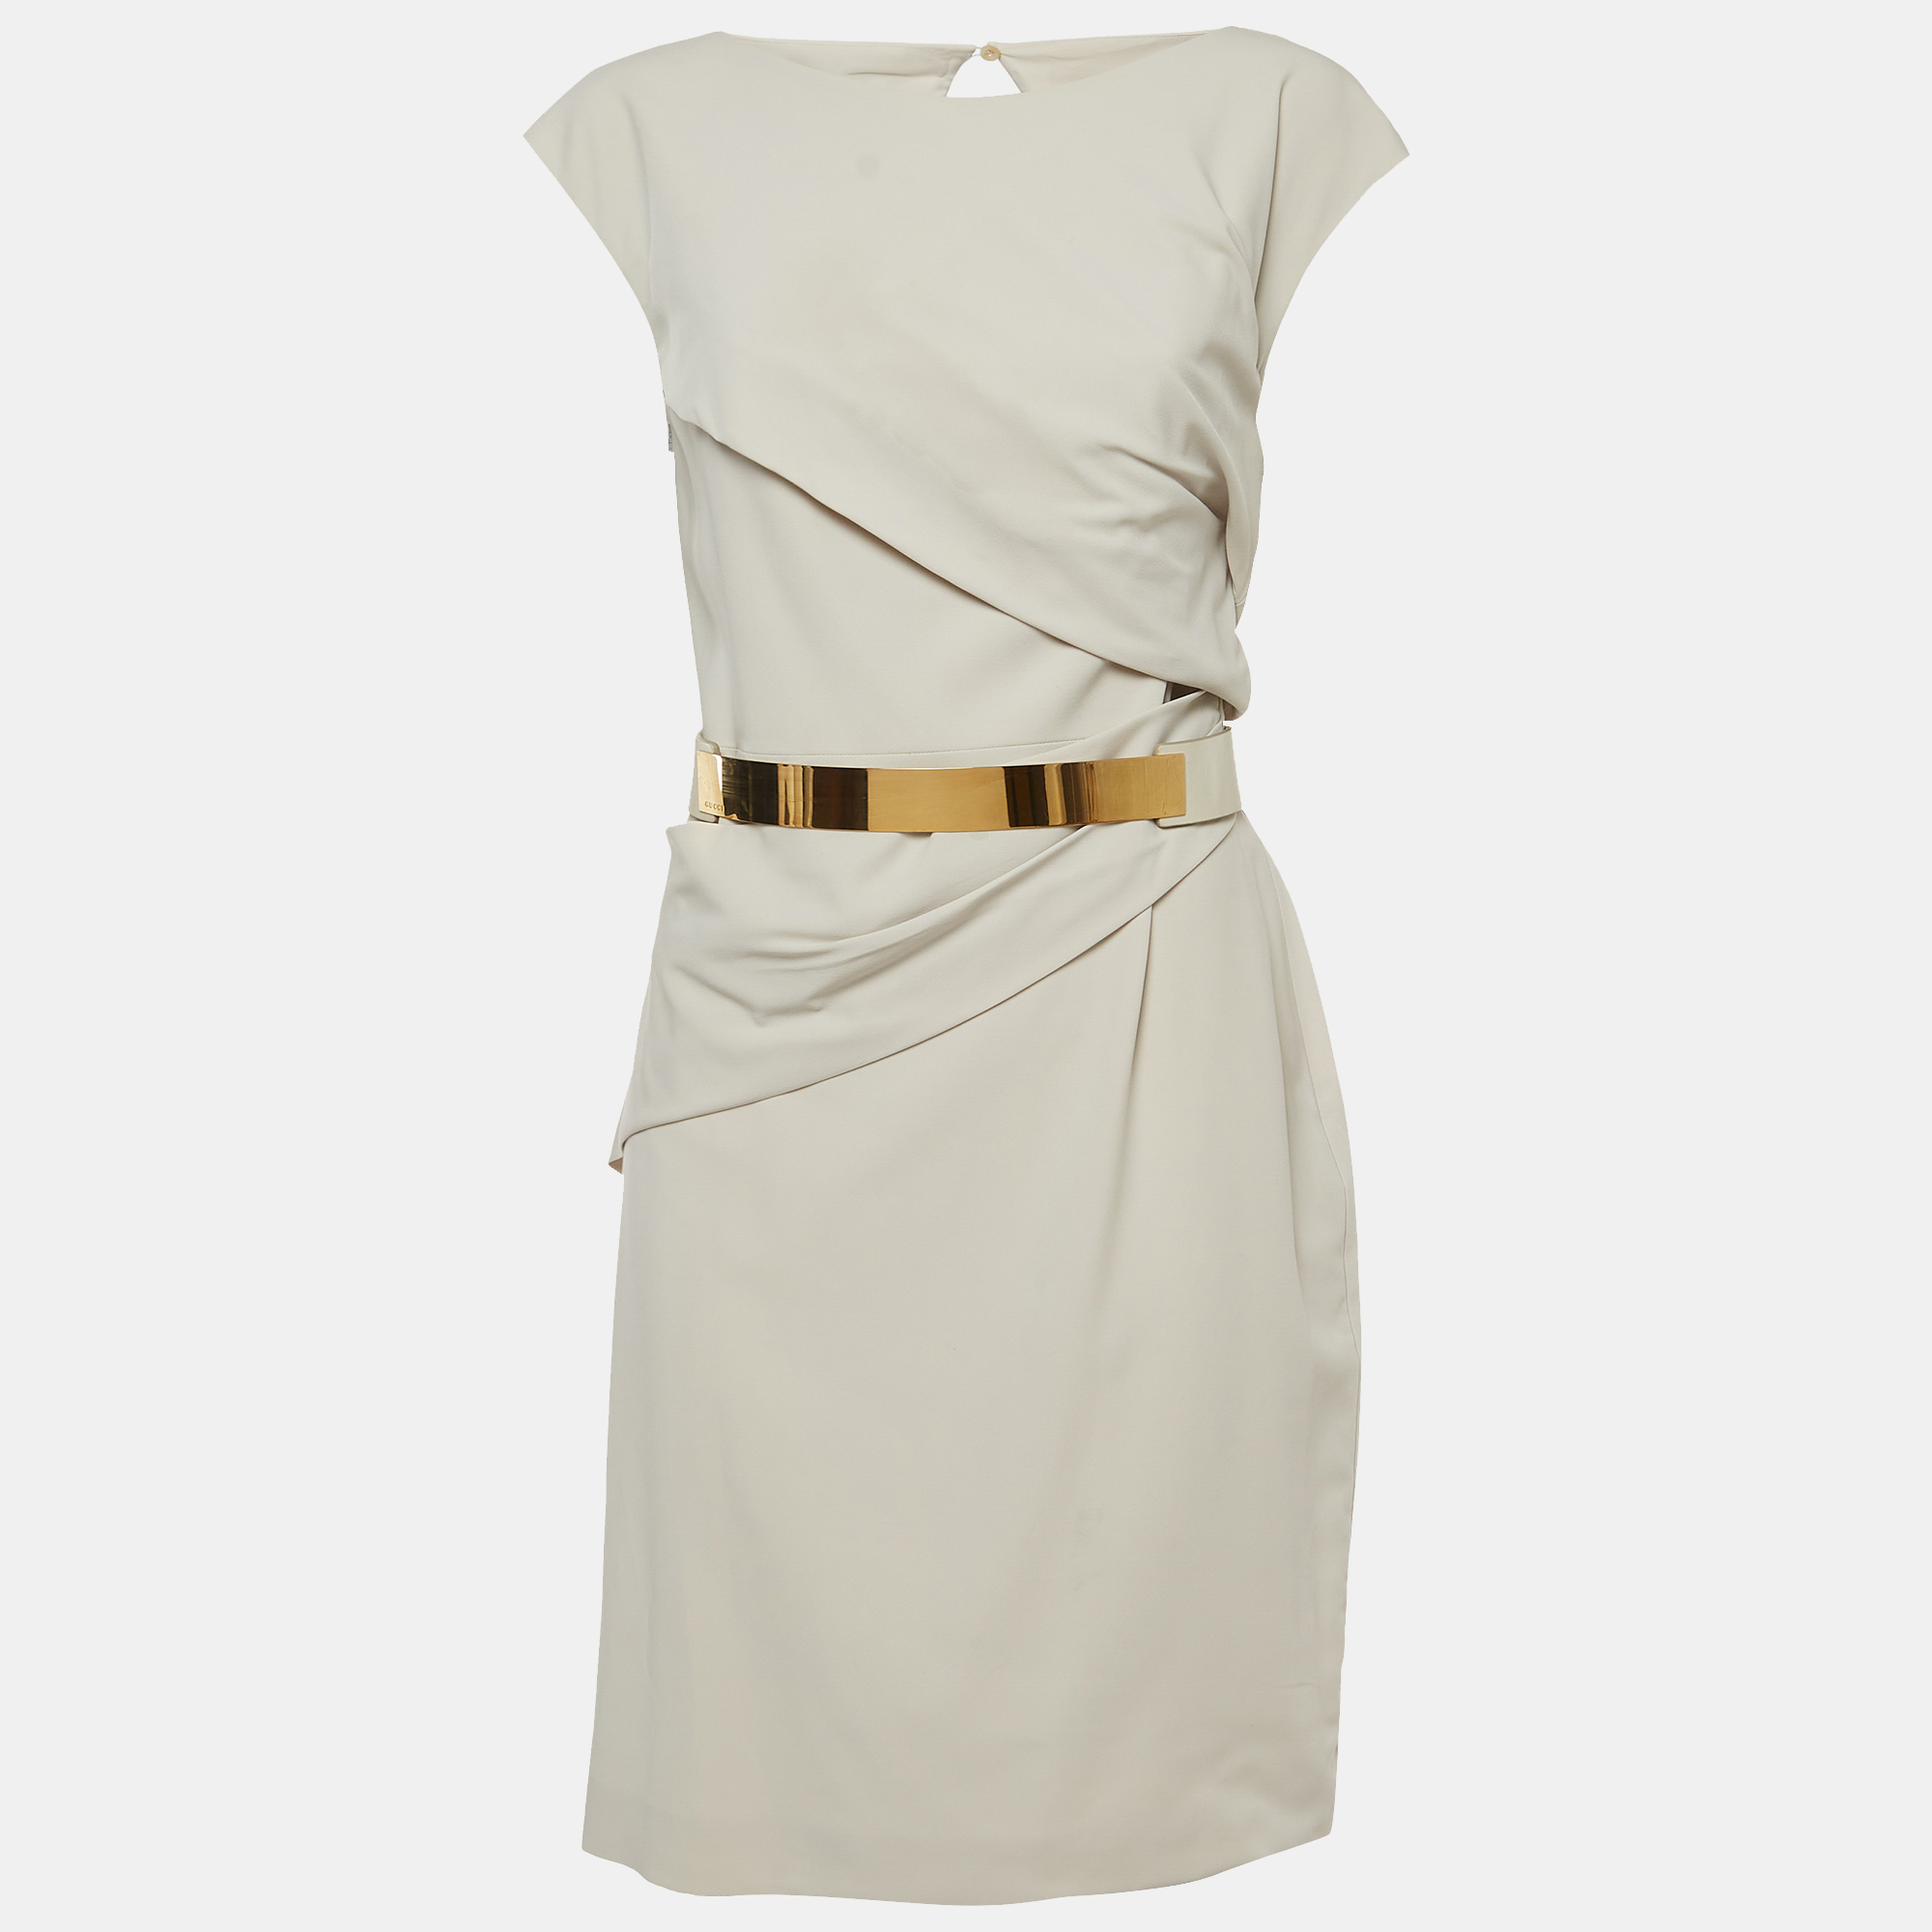 Gucci Pale Grey Stretch Cady Belted Knee-Length Dress M